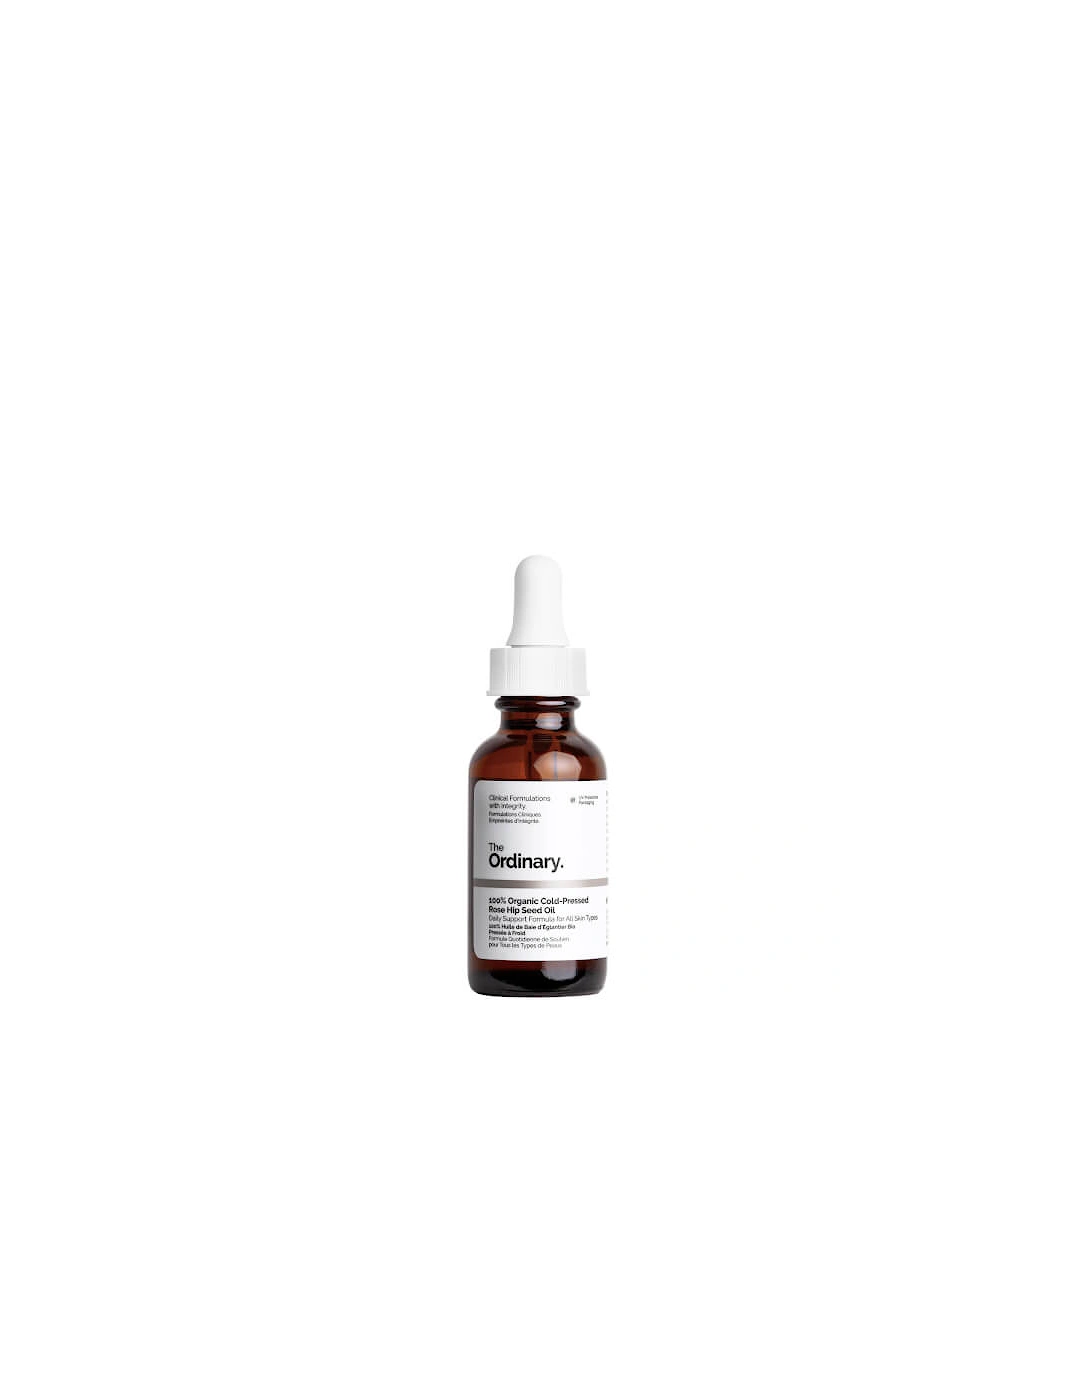 100% Organic Cold-Pressed Rose Hip Seed Oil 30ml - - 100% Organic Cold-Pressed Rose Hip Seed Oil 30ml - Sydneysider - 100% Organic Cold-Pressed Rose Hip Seed Oil 30ml - MaDiva - 100% Organic Cold-Pressed Rose Hip Seed Oil 30ml - Andrea, 2 of 1